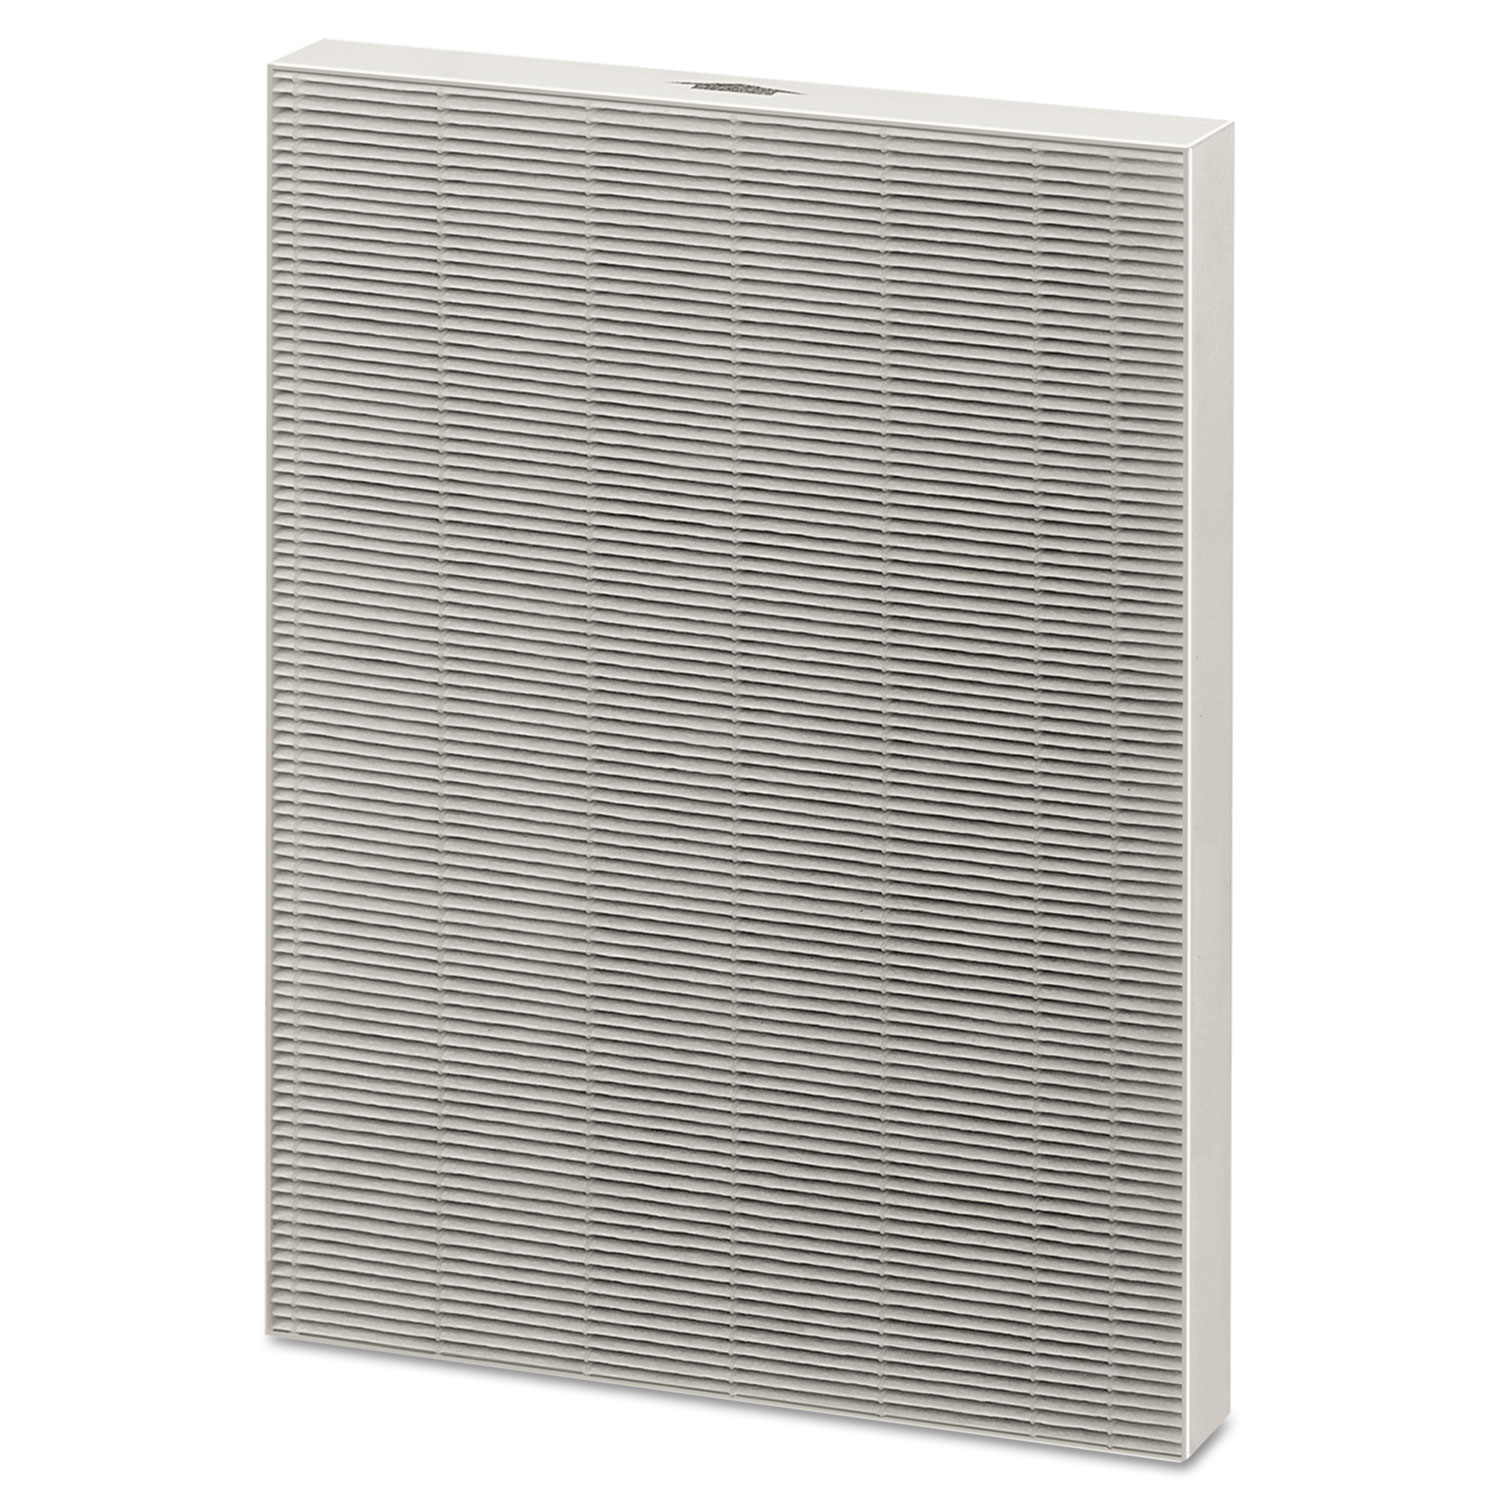 True HEPA Filter with Aerasafe Antimicrobial Treatment for Aeramax 290